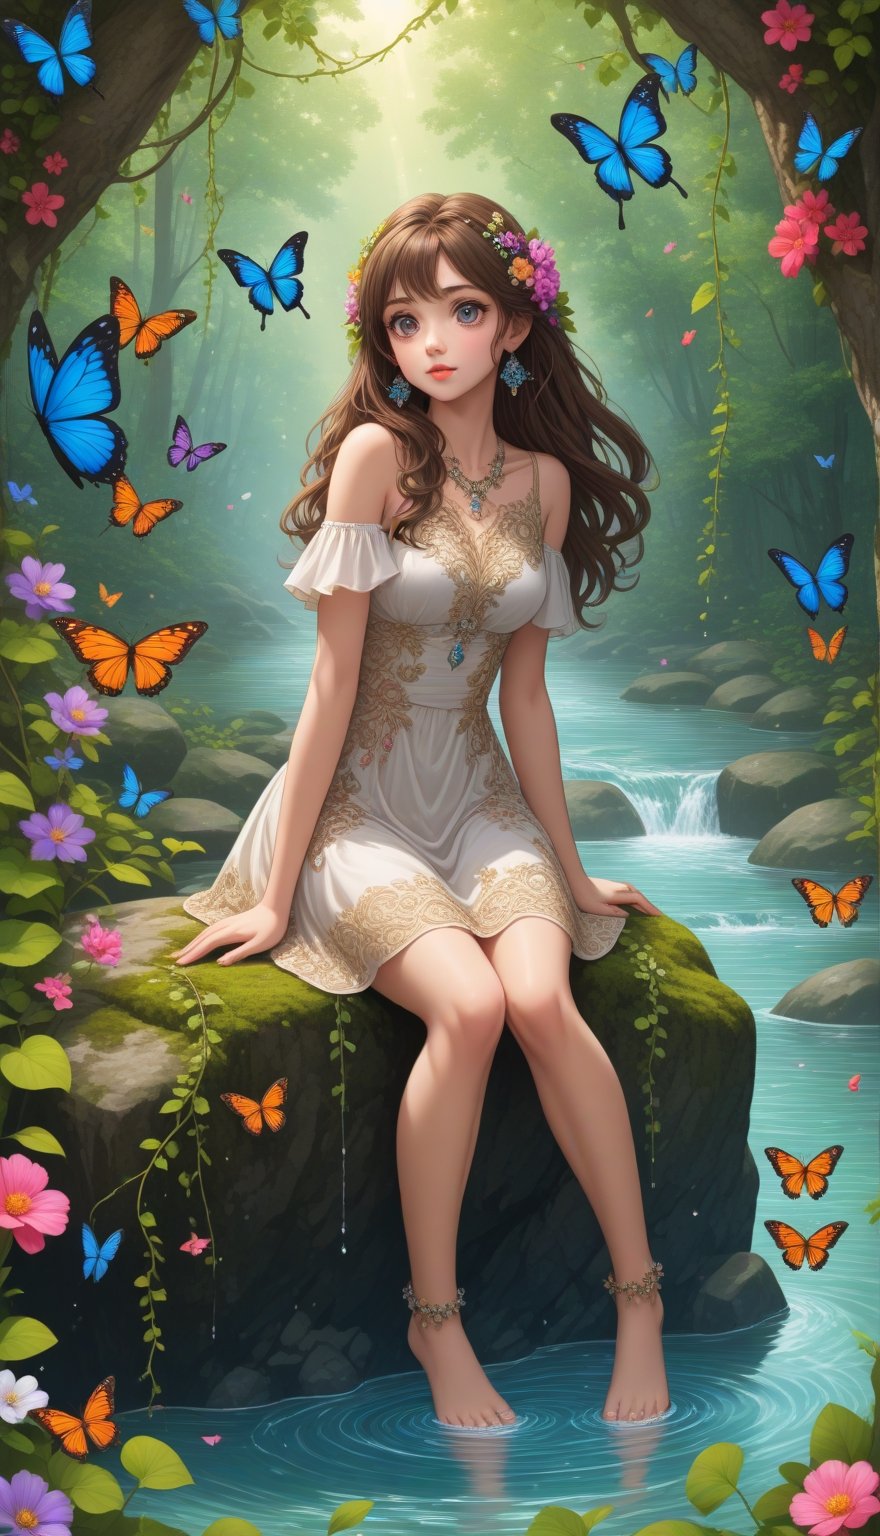 Solo, full body portrait, beautiful woman with long brown hair, big detailed eyes and dangling crystal earrings, sitting on boulders, both feet in water kicking, in forest with hanging thick vines, colorful flowers, butterflies, highly detailed, dynamic angle, more detail XL, ,<lora:659095807385103906:1.0>